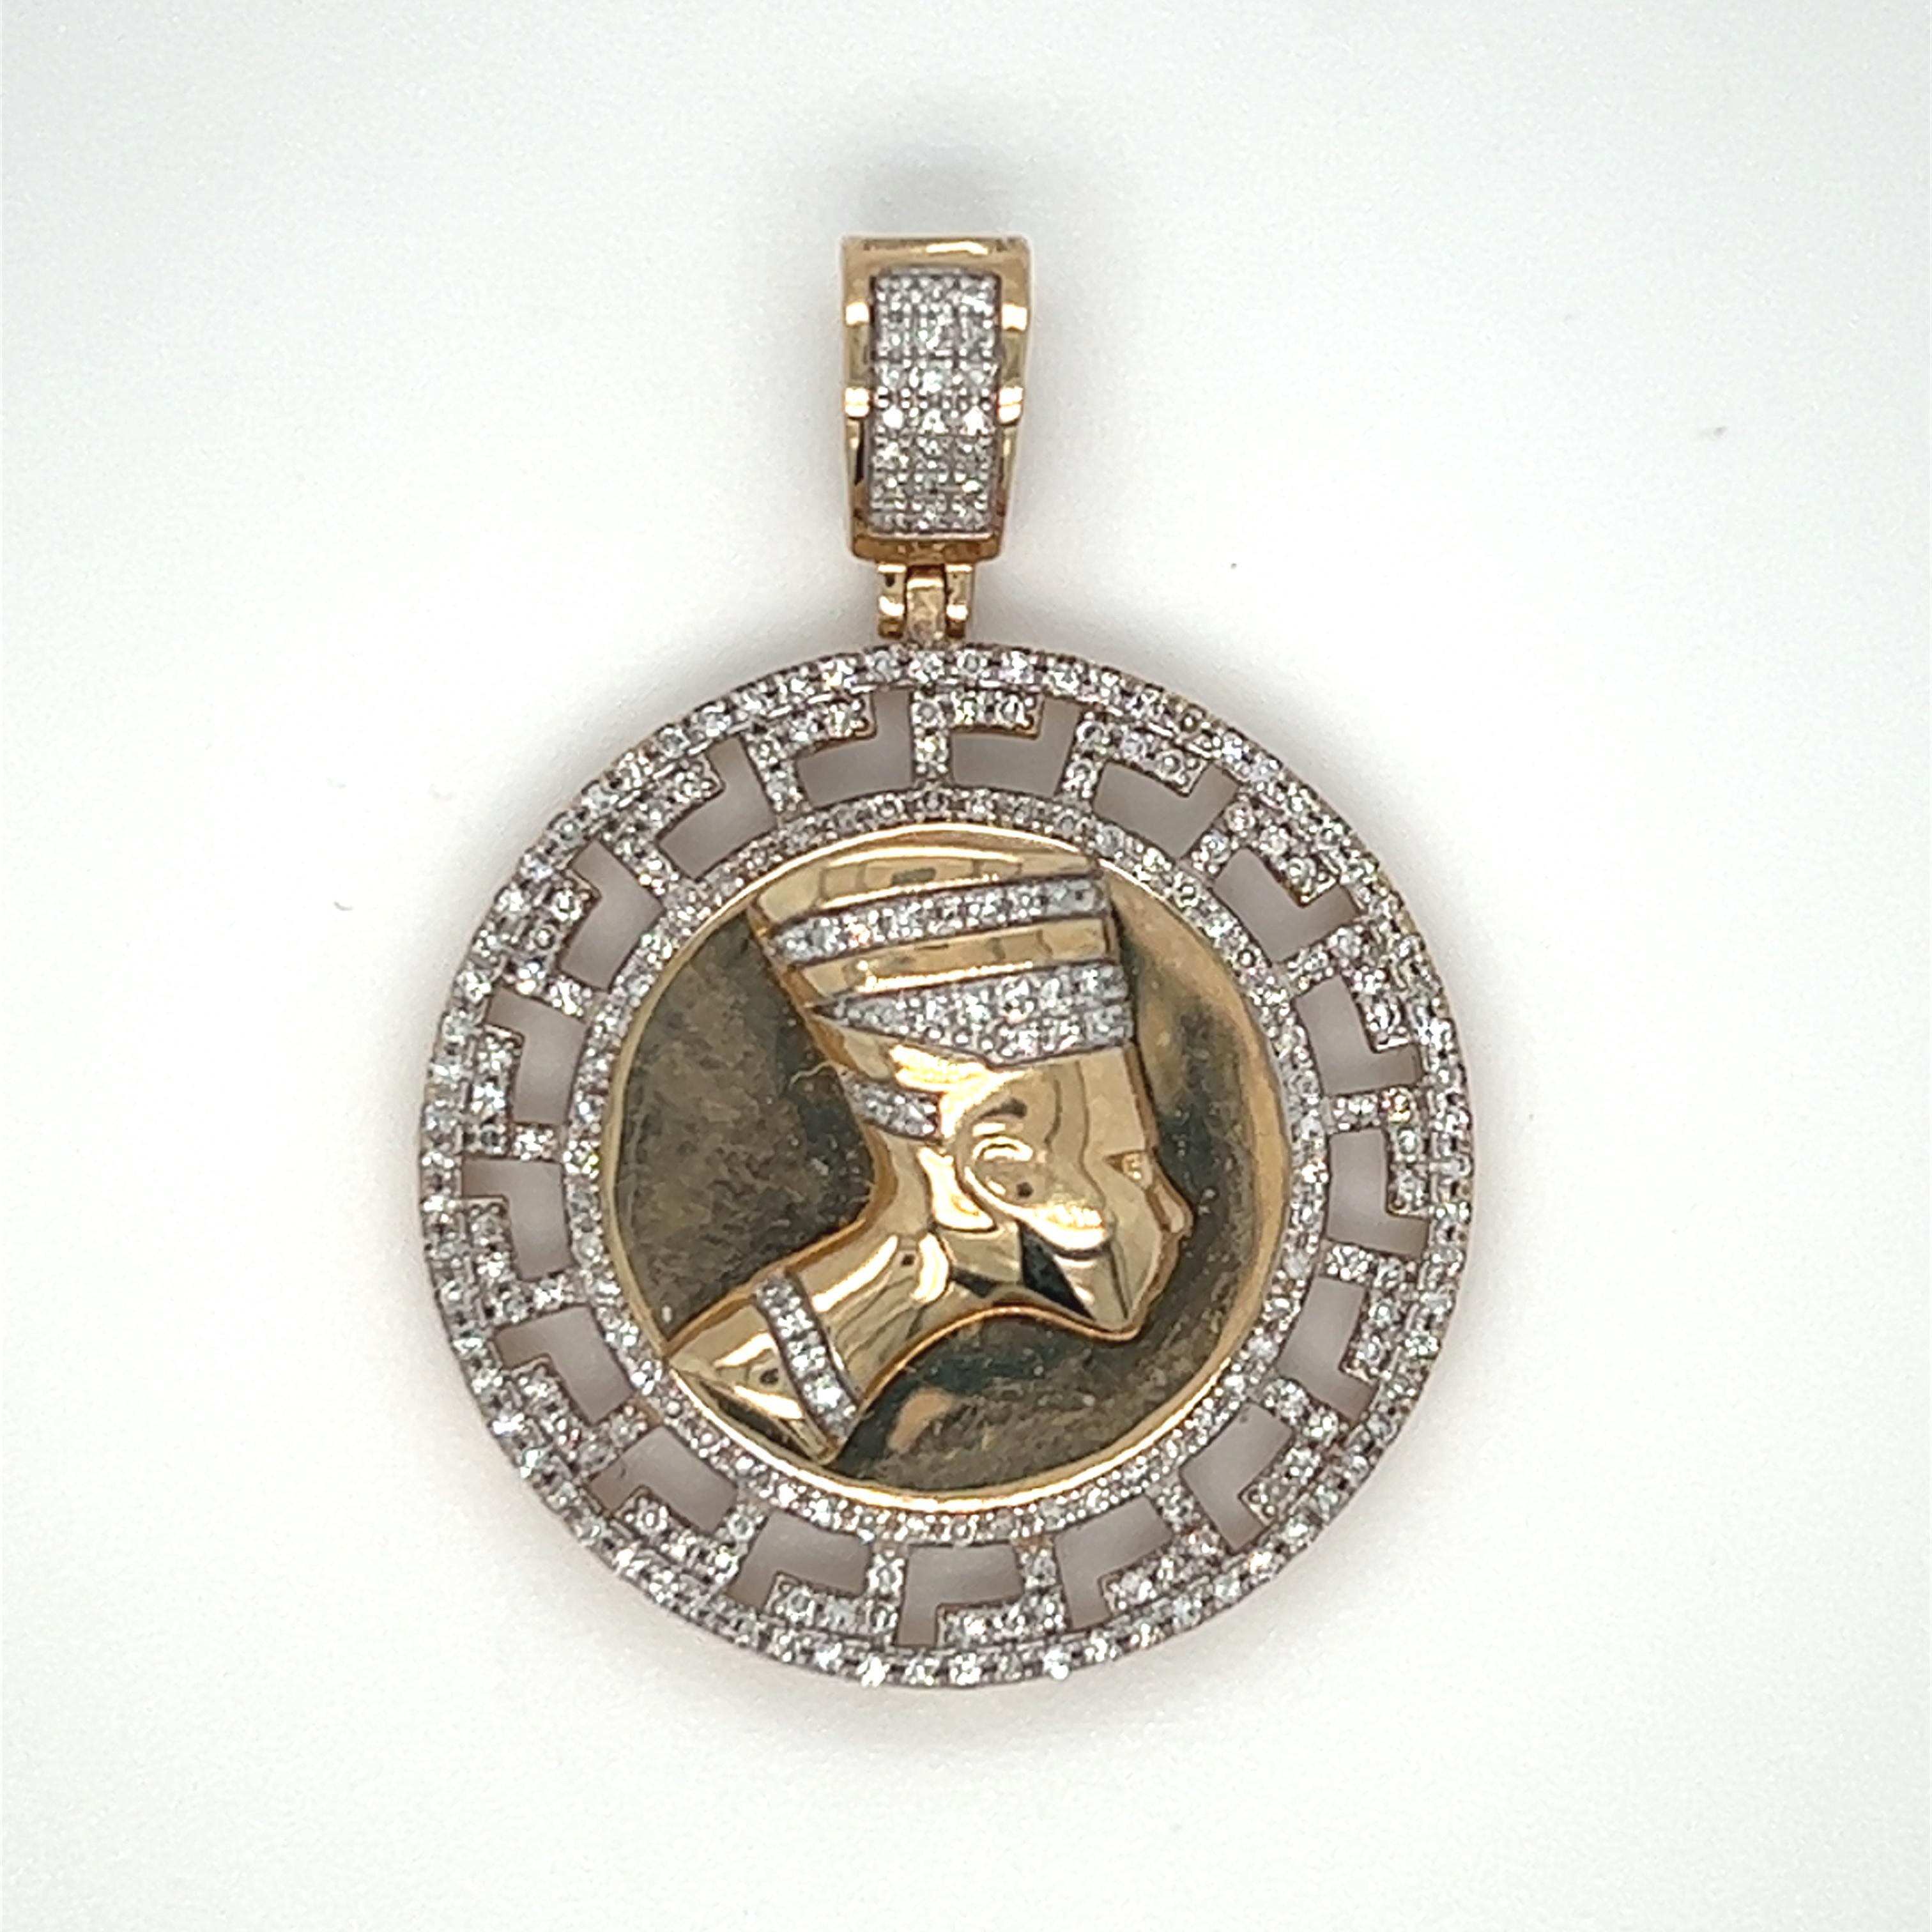 The Queen Nefertiti Pendant, a symbol of the beauty, power and regality that lies within us. The pendant weighs 4.3 grams and has small diamond total weight of 1.25 carats. This pendant makes a wonderful and meaningful gift.  10K yellow gold, signed